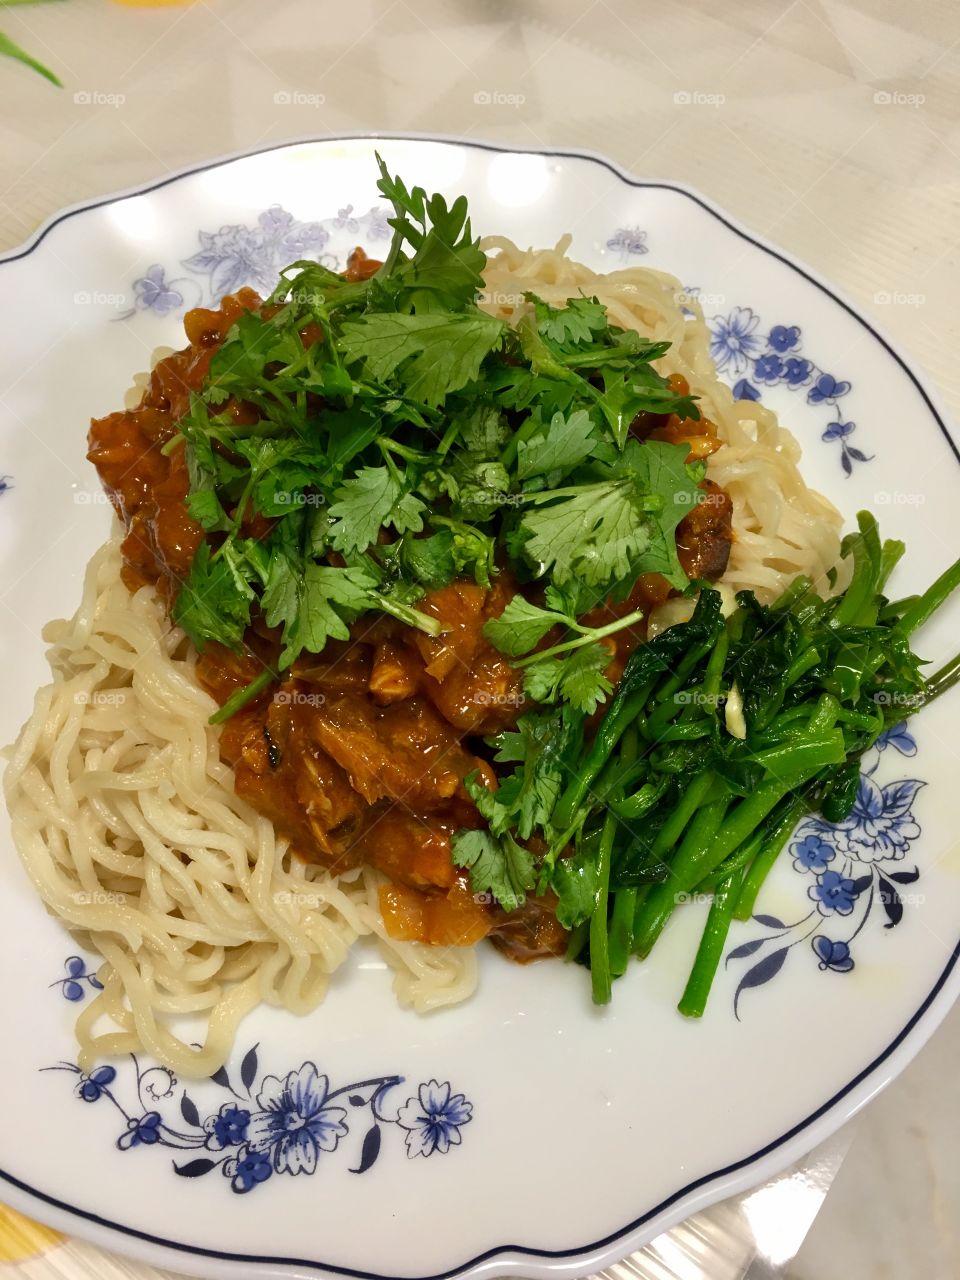 Homemade season curry with noodles and vegetables 